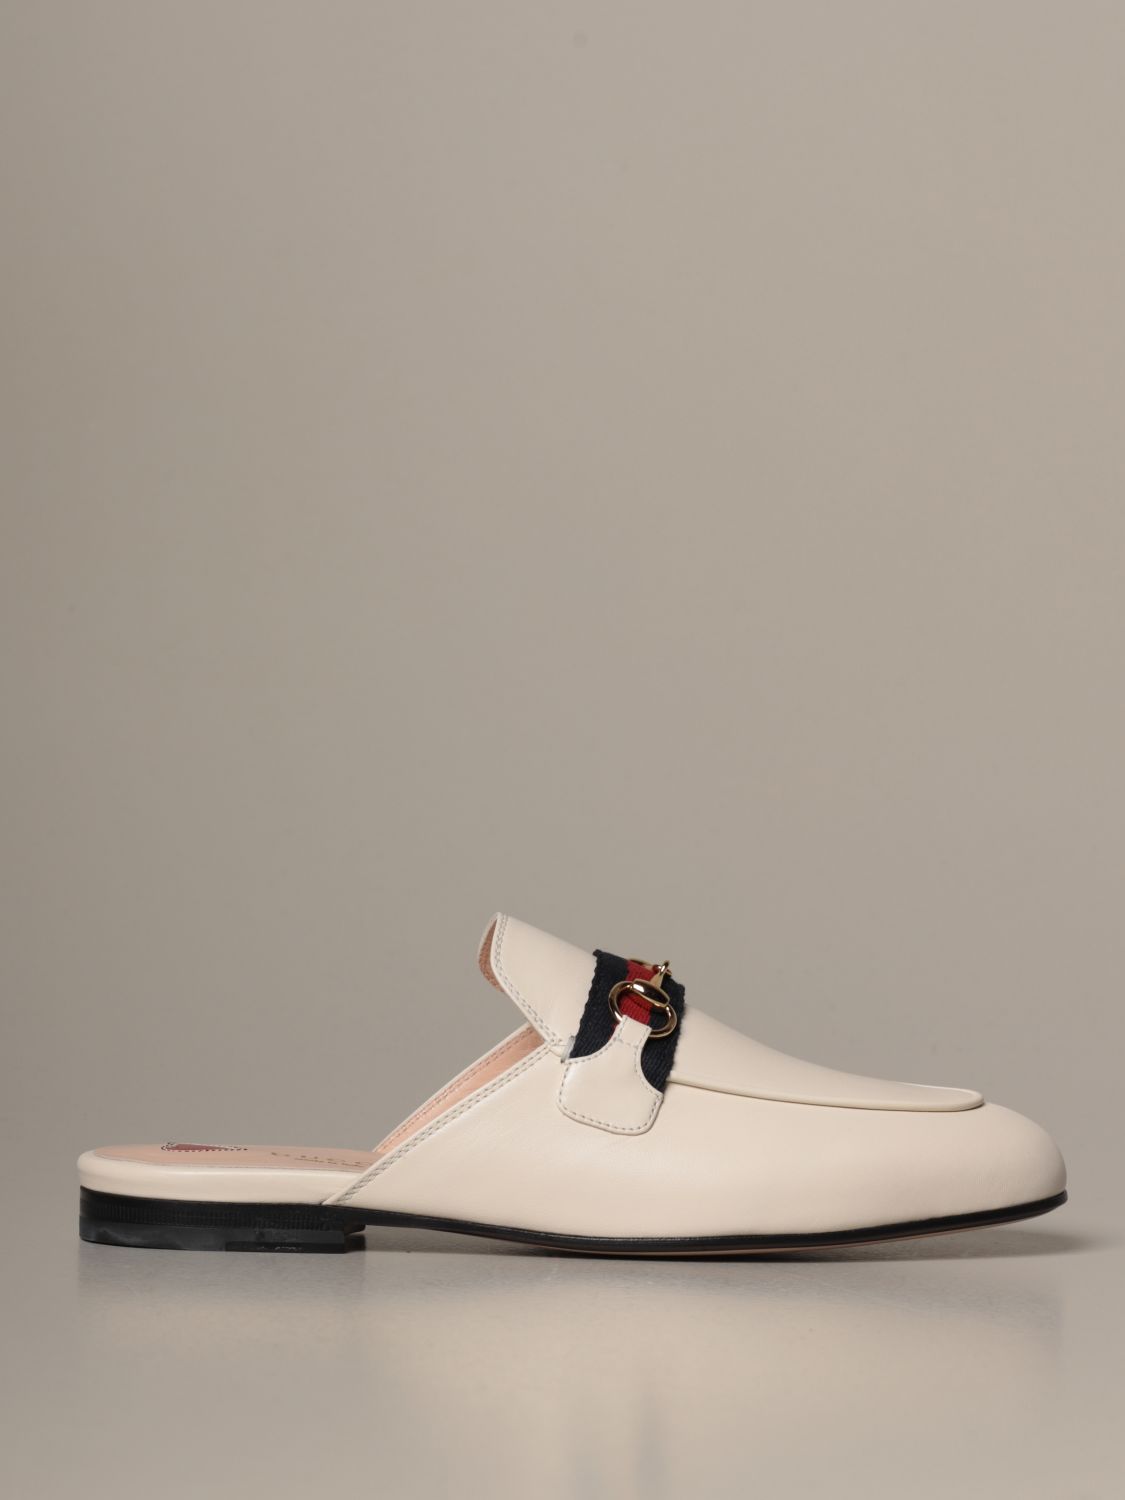 Gucci Princetown leather slipper with 